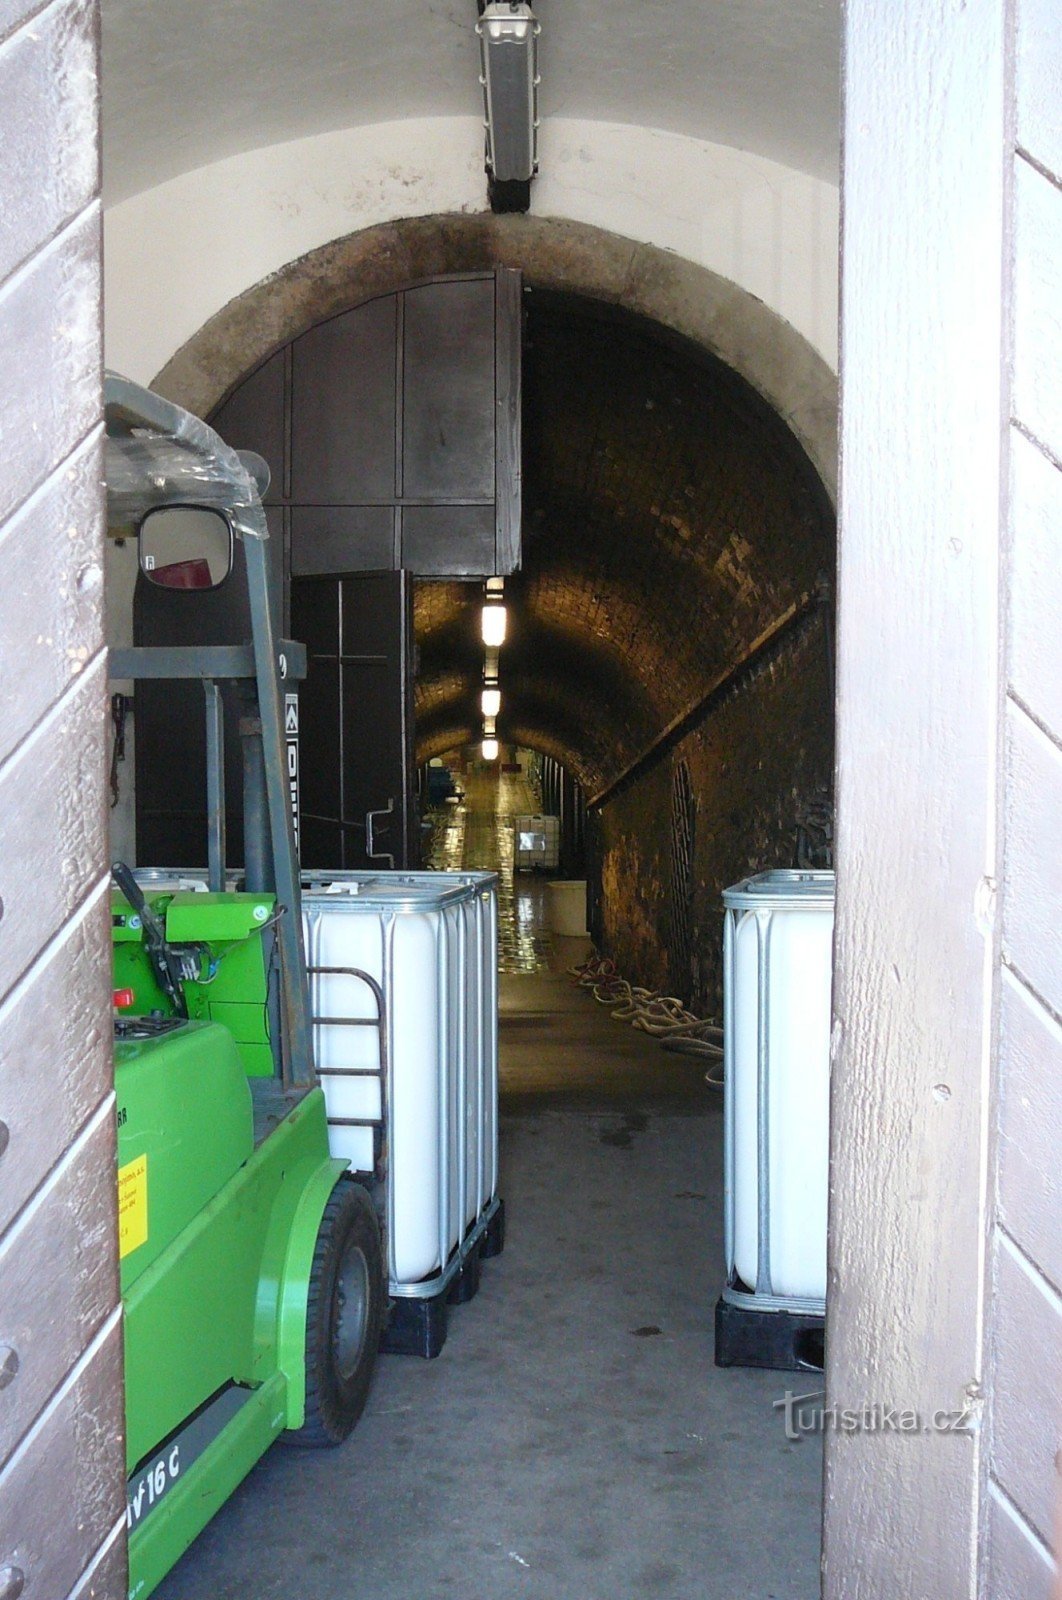 View into the cellar